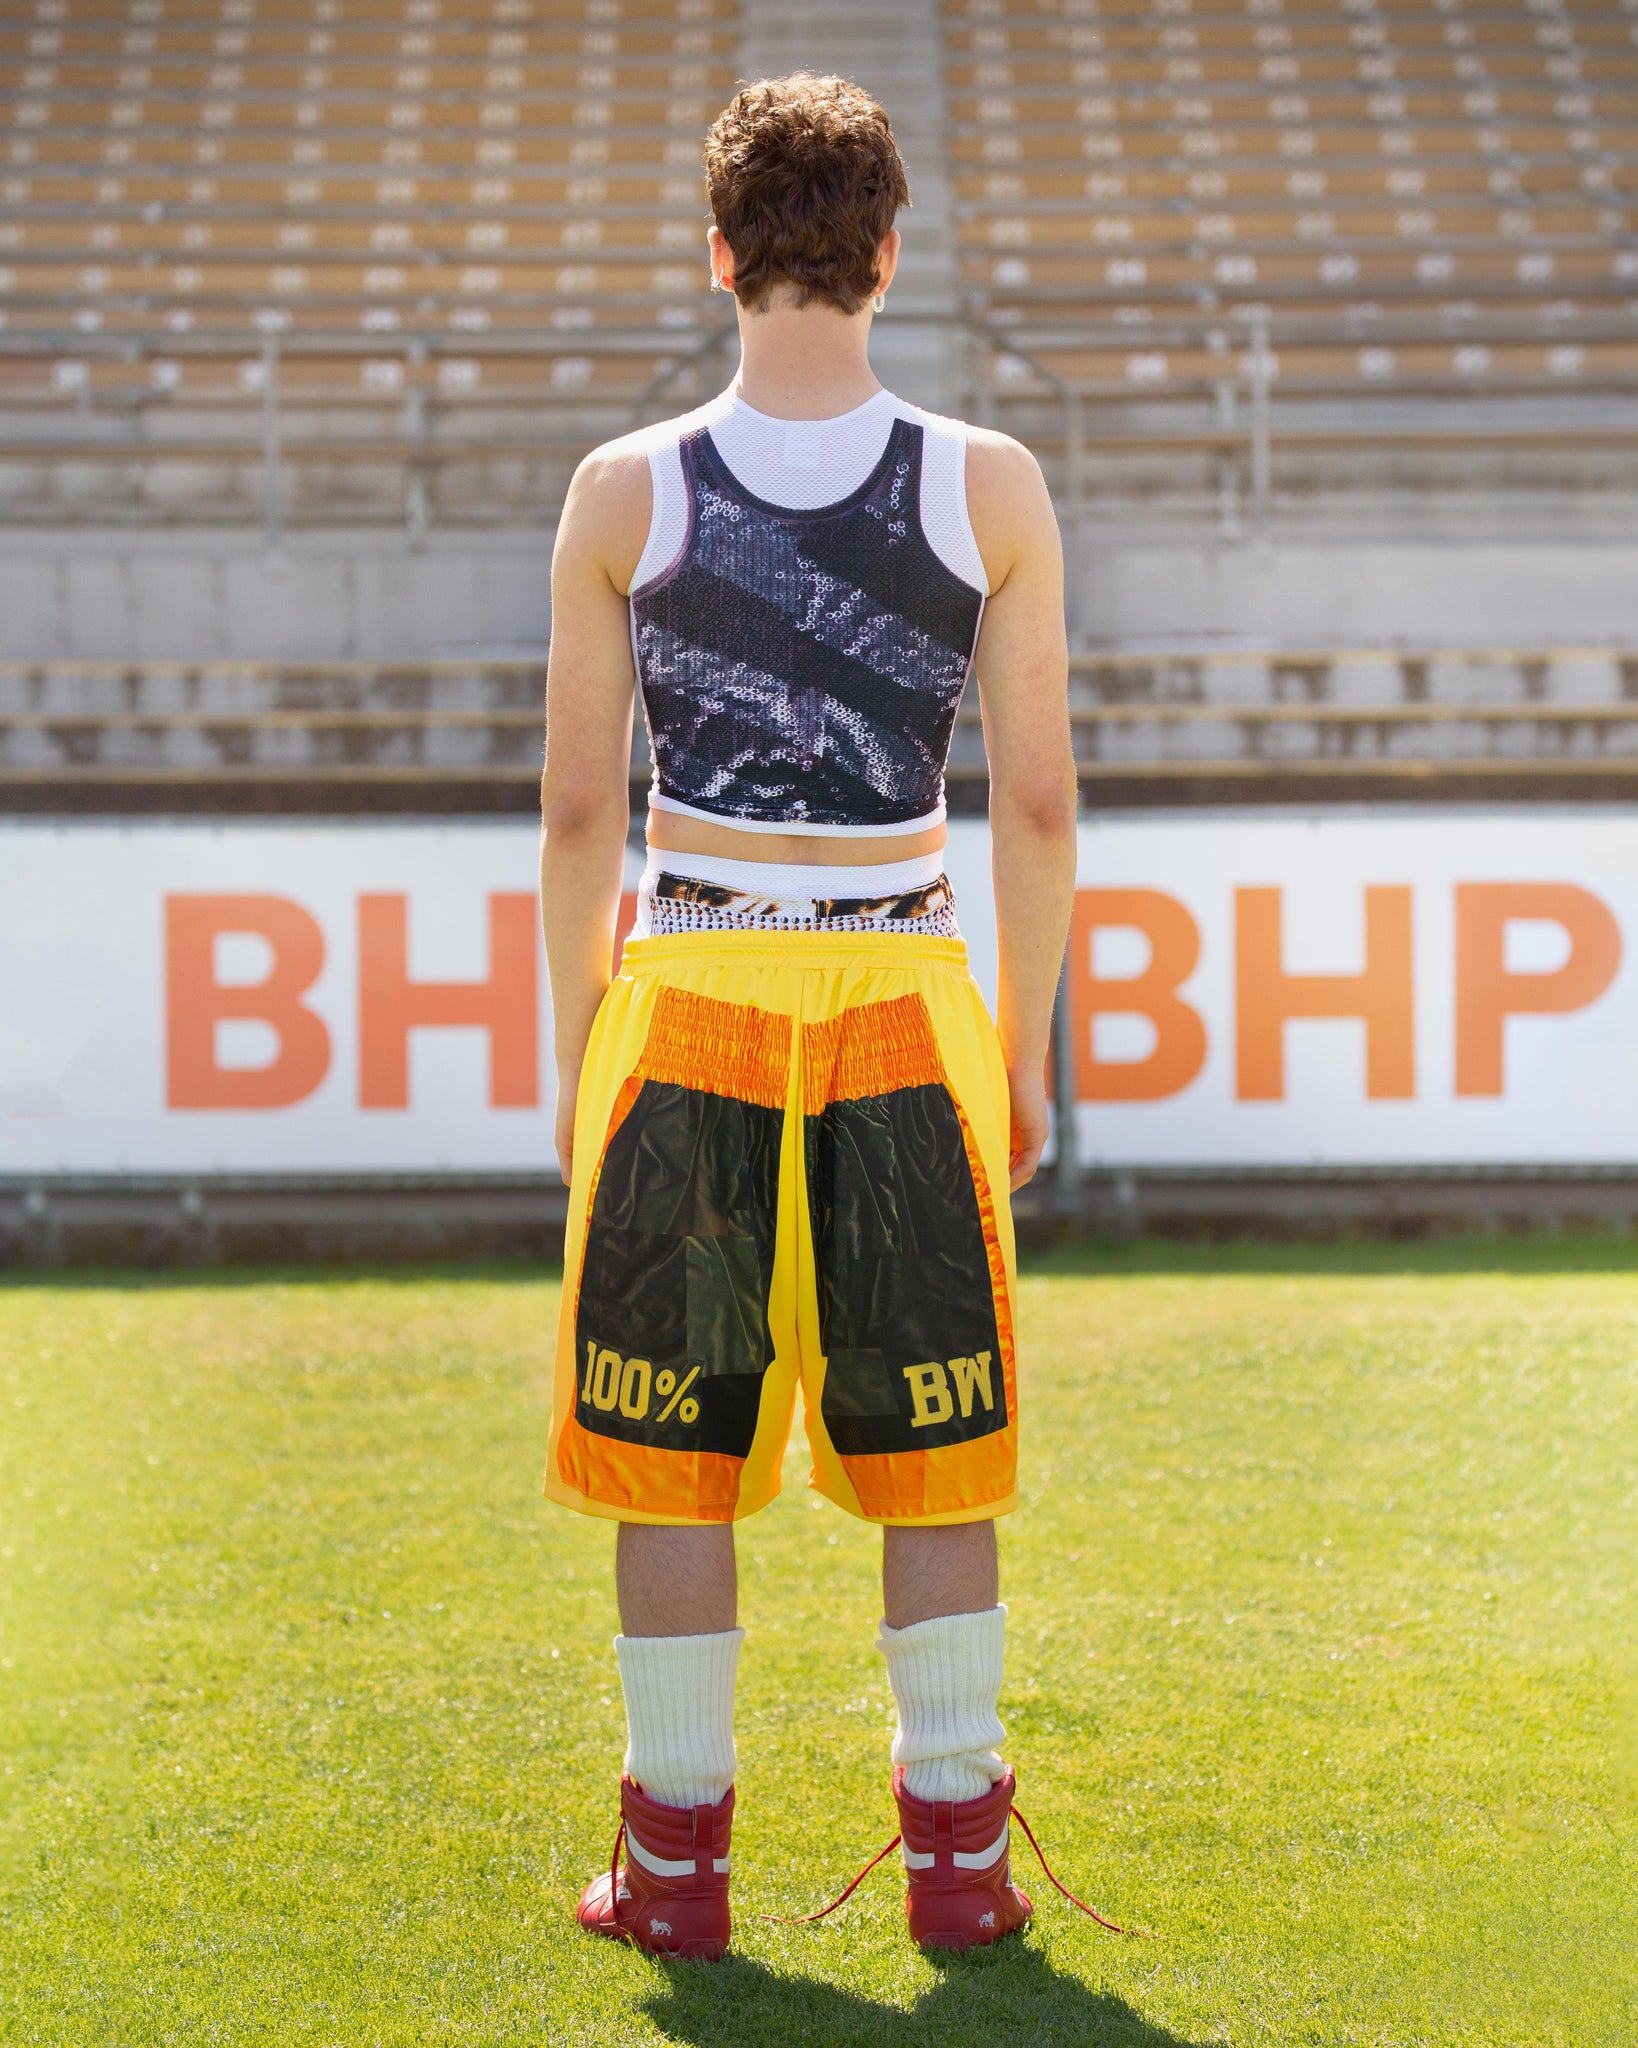 The Victory Shorts